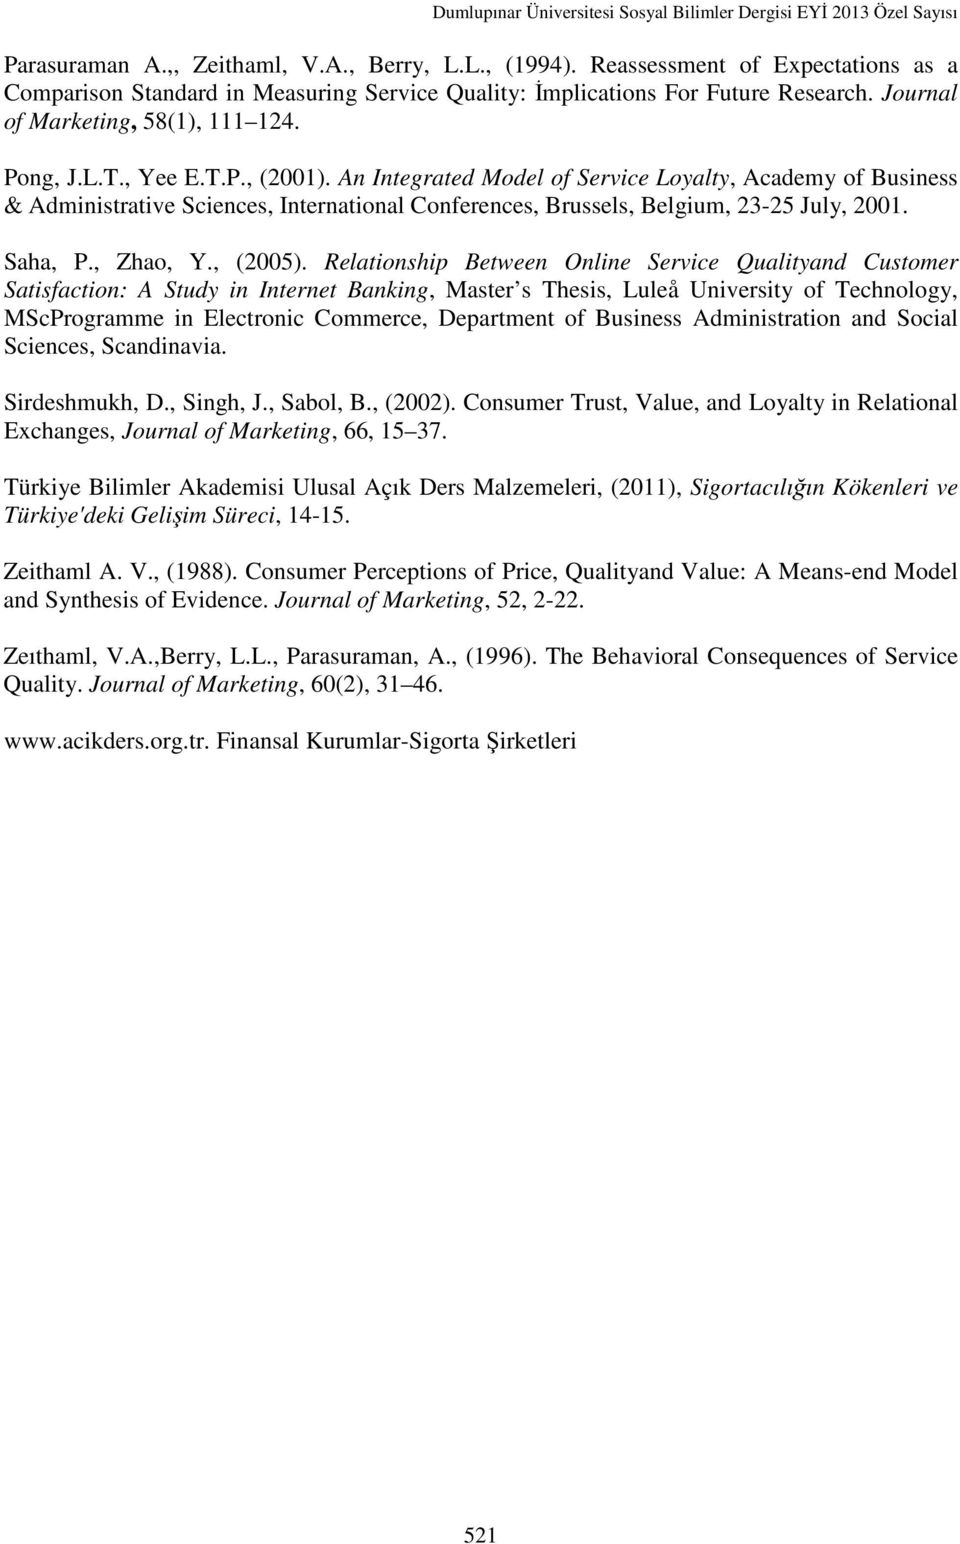 An Integrated Model of Service Loyalty, Academy of Business & Administrative Sciences, International Conferences, Brussels, Belgium, 23-25 July, 2001. Saha, P., Zhao, Y., (2005).